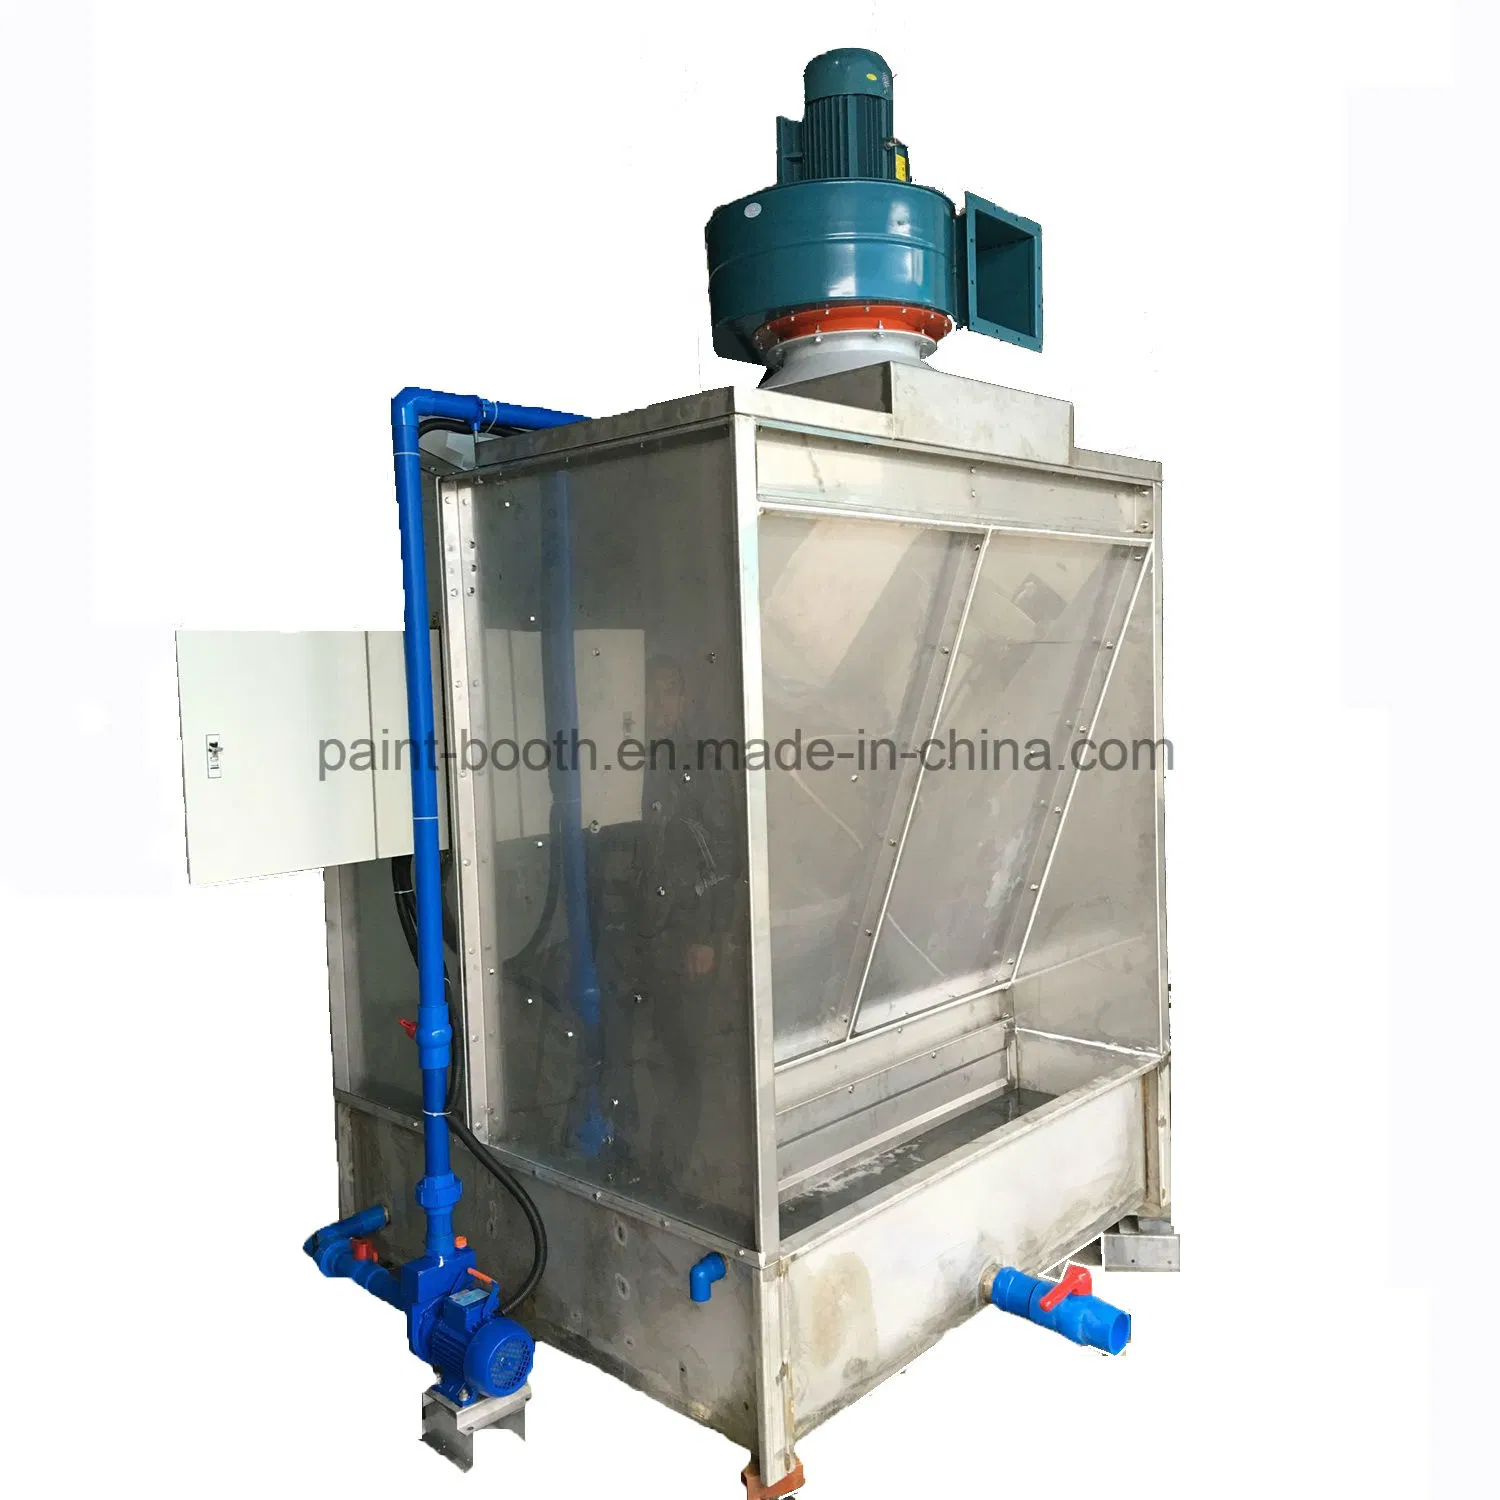 It-Ws-1 Infitech High Efficient Open Face Cross Draft Industrial Water Wash Spray Booth/Painting Booth